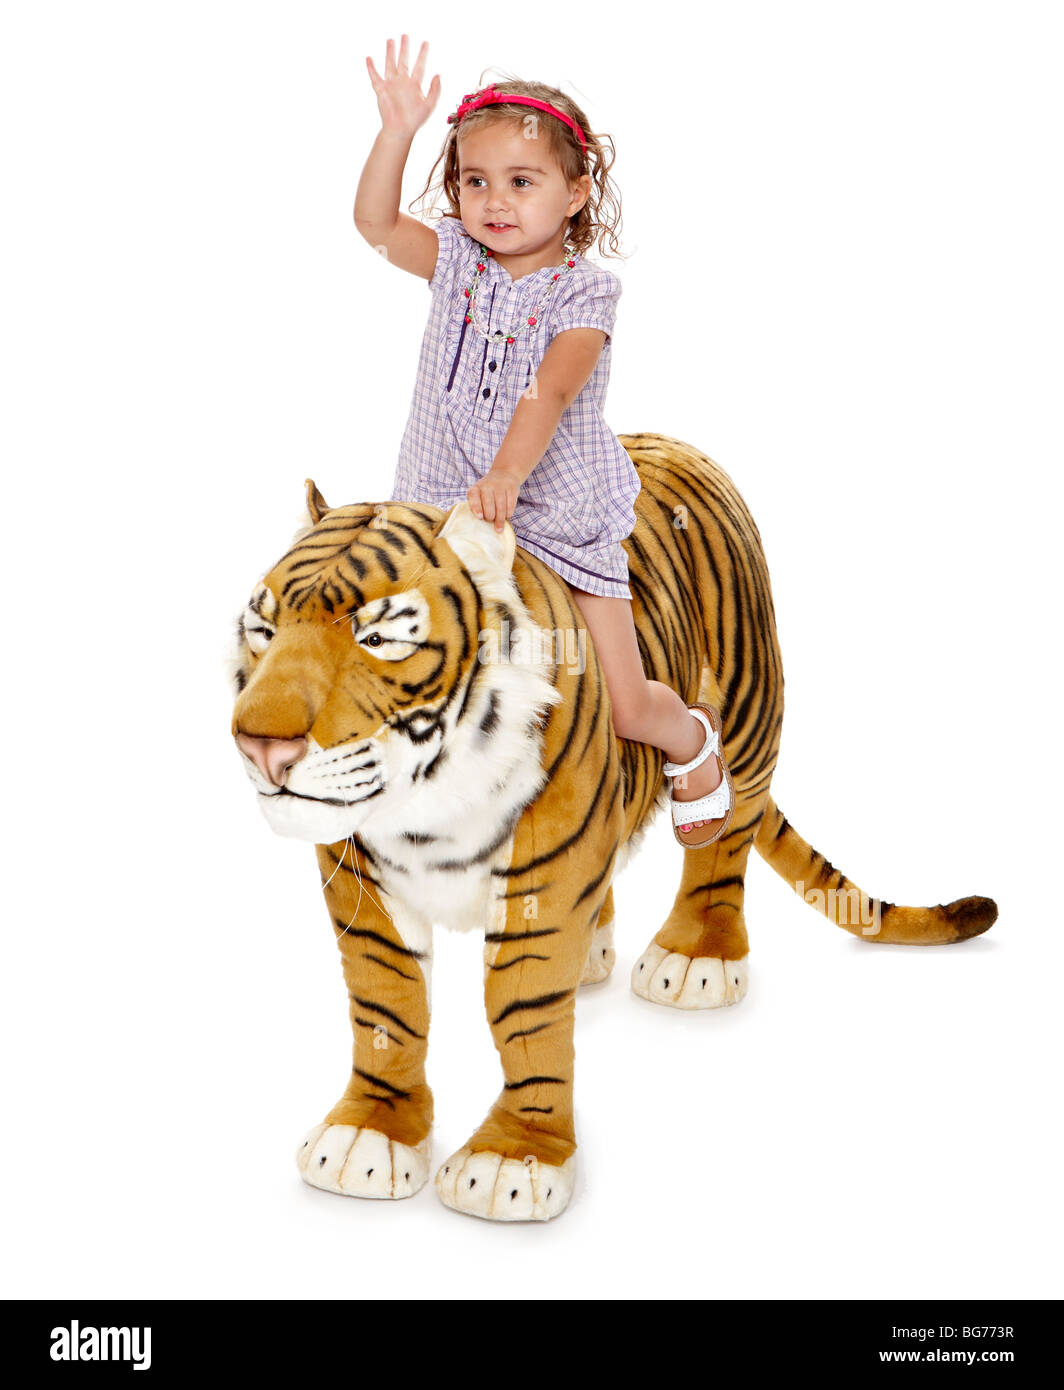 Large Toy Tiger Hannah riding Stock Photo